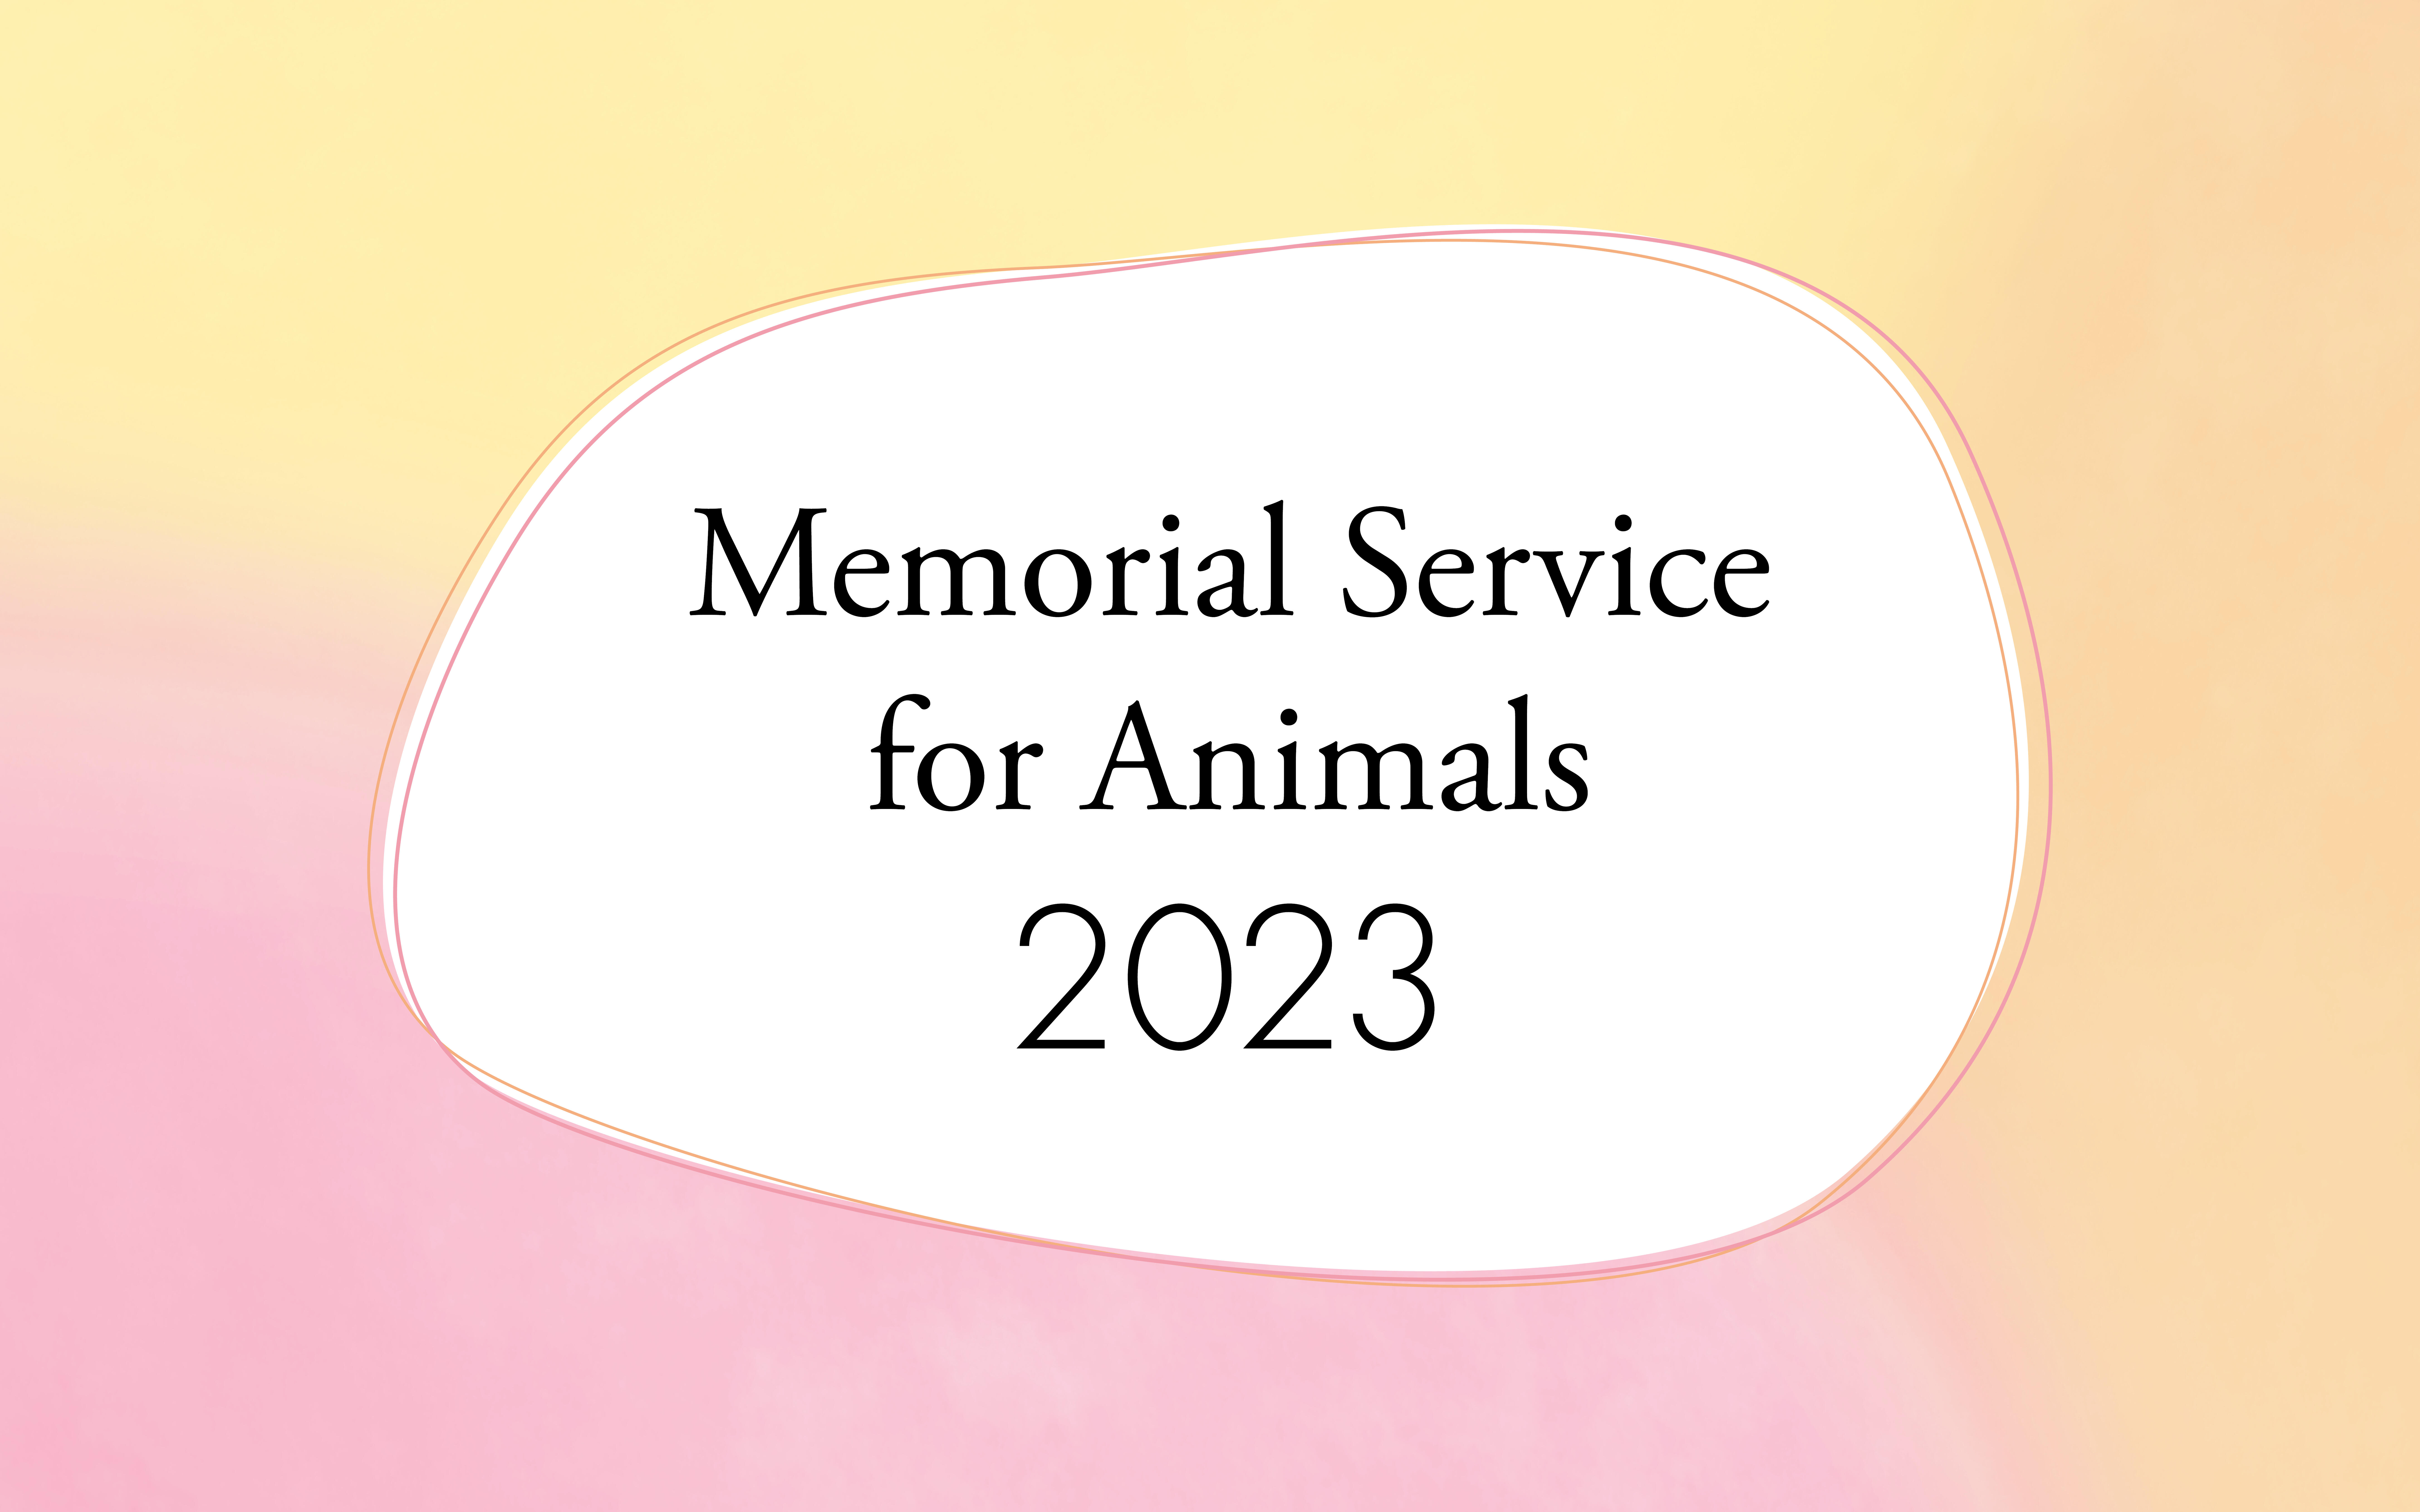 Annual memorial service for animals held